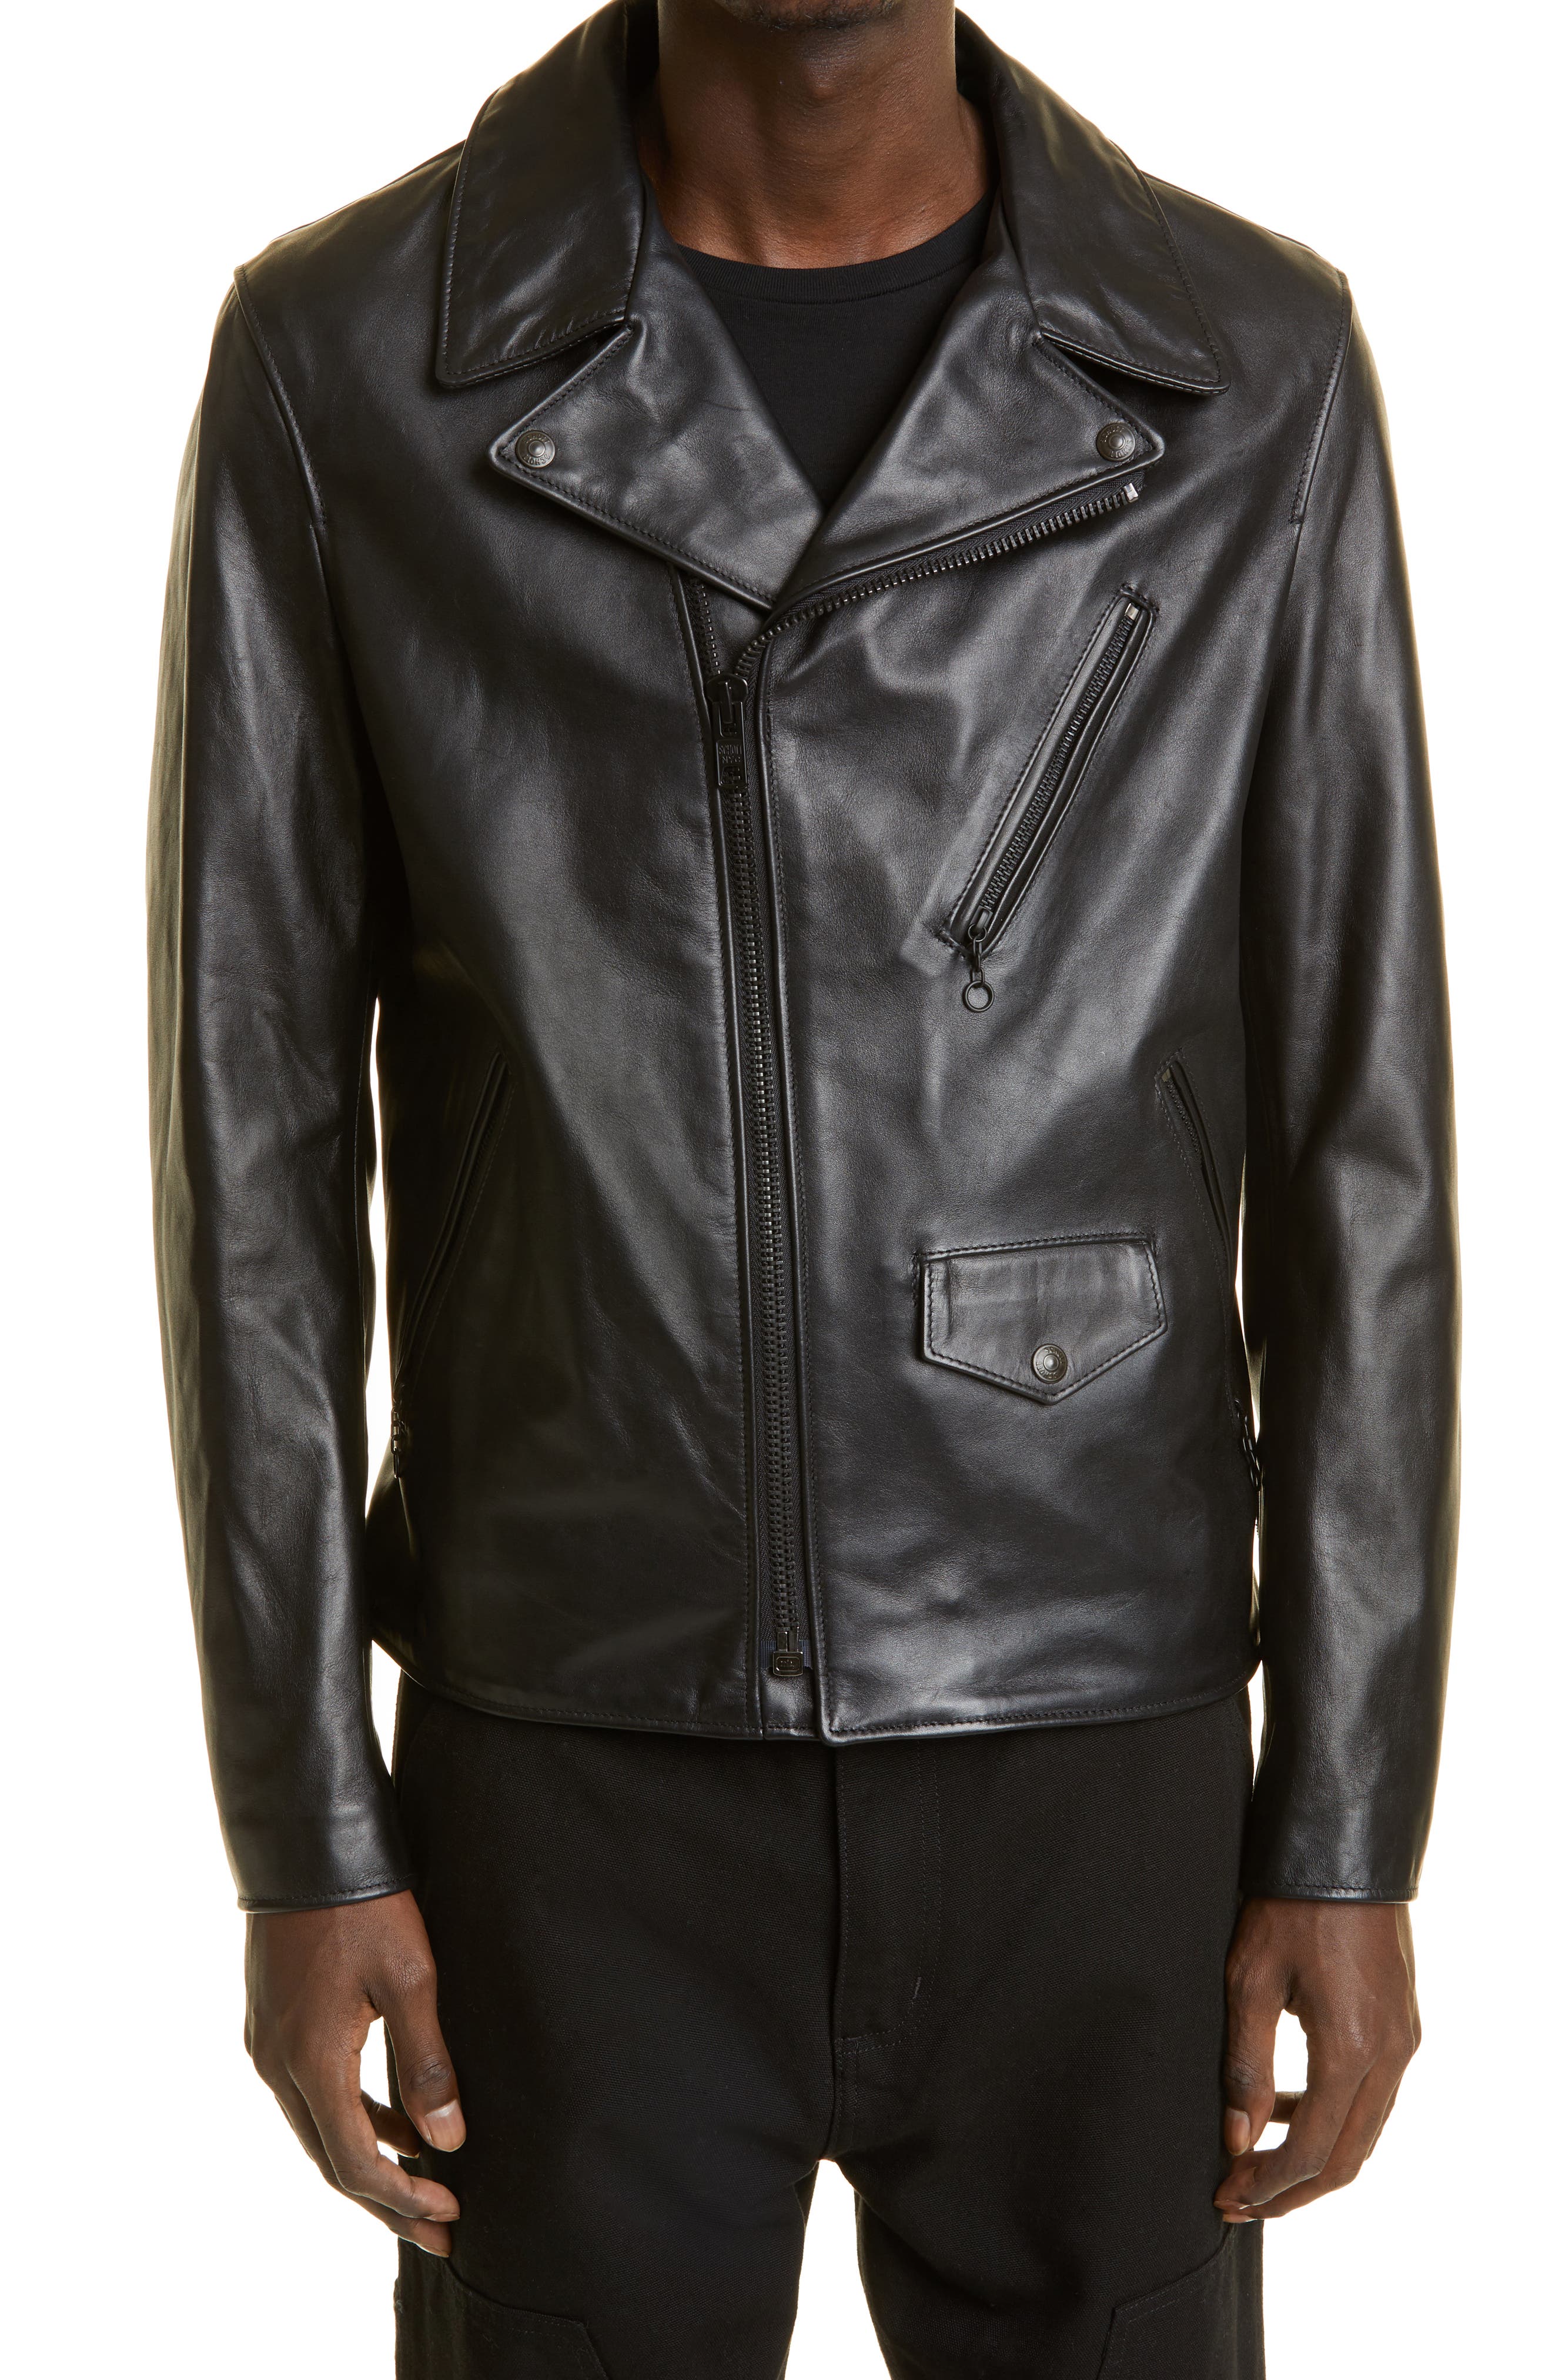 Mens Real Leather Motorcycle Perfecto Jacket Short Casual Brand New Free Deliver